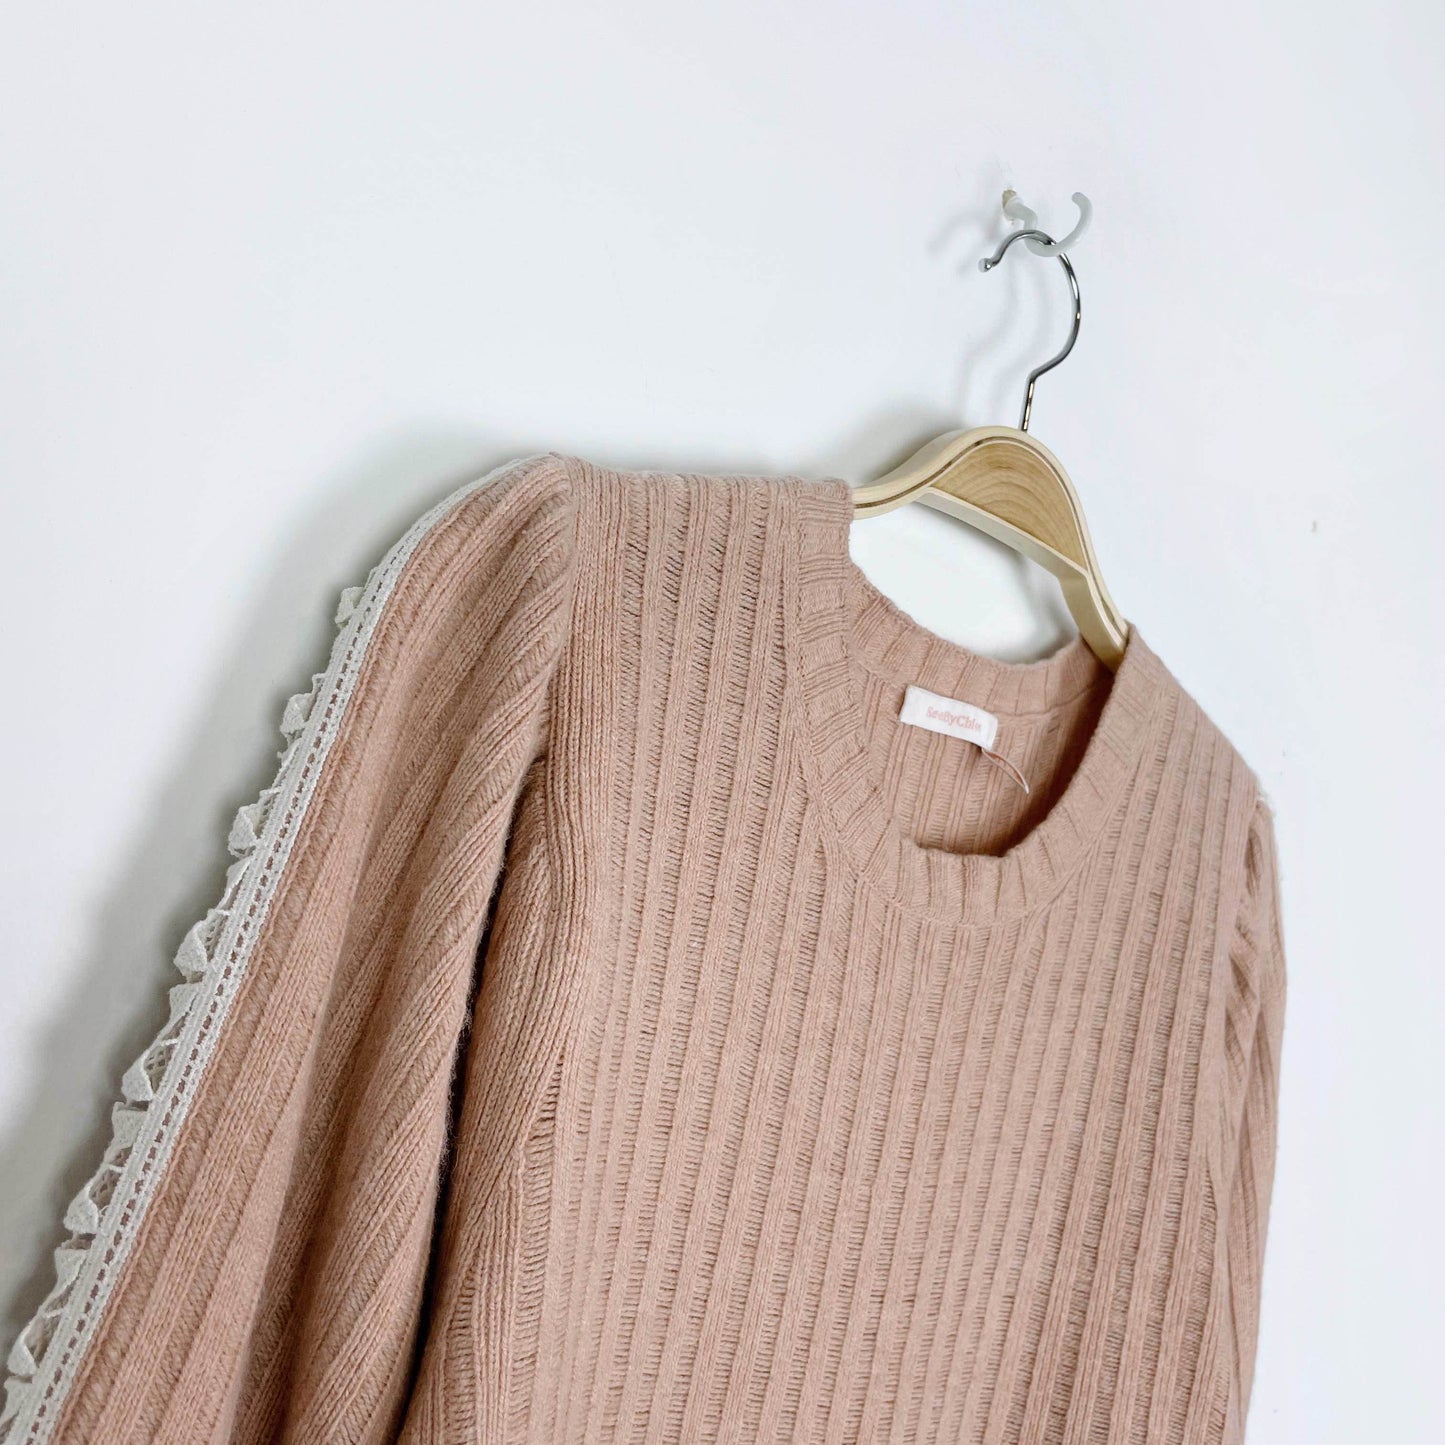 See by Chloé - Collar Blouse - Cameo Rose - CLOTHES - WOMEN